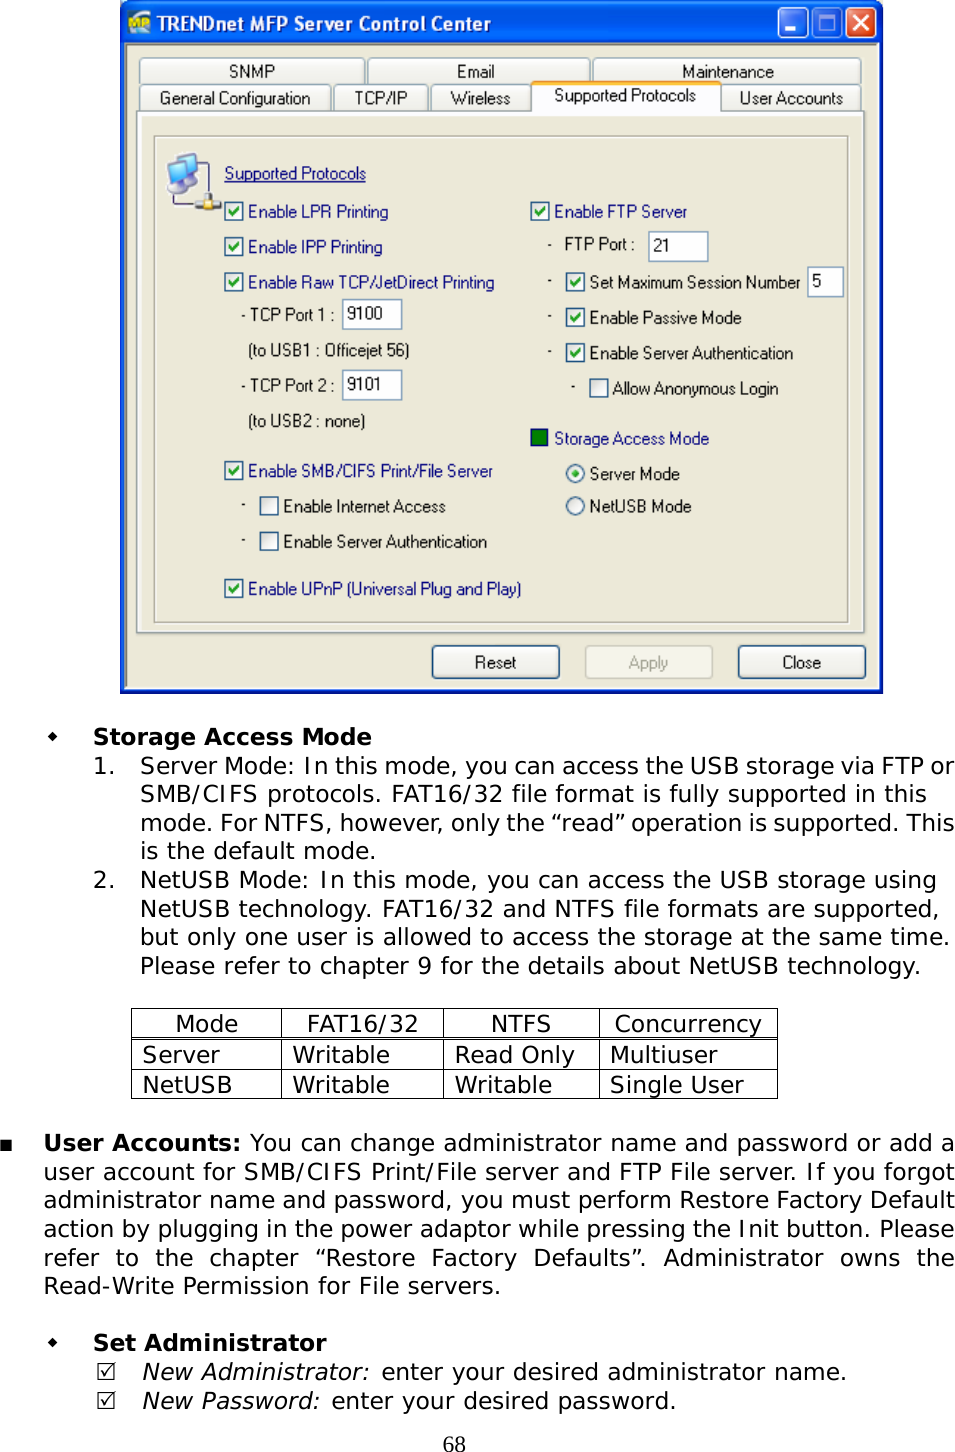     68   Storage Access Mode 1. Server Mode: In this mode, you can access the USB storage via FTP or SMB/CIFS protocols. FAT16/32 file format is fully supported in this mode. For NTFS, however, only the “read” operation is supported. This is the default mode. 2. NetUSB Mode: In this mode, you can access the USB storage using NetUSB technology. FAT16/32 and NTFS file formats are supported, but only one user is allowed to access the storage at the same time. Please refer to chapter 9 for the details about NetUSB technology.  Mode FAT16/32 NTFS Concurrency Server Writable Read Only Multiuser NetUSB Writable  Writable Single User   User Accounts: You can change administrator name and password or add a user account for SMB/CIFS Print/File server and FTP File server. If you forgot administrator name and password, you must perform Restore Factory Default action by plugging in the power adaptor while pressing the Init button. Please refer to the chapter “Restore Factory Defaults”. Administrator owns the Read-Write Permission for File servers.    Set Administrator 5 New Administrator: enter your desired administrator name. 5 New Password: enter your desired password. 